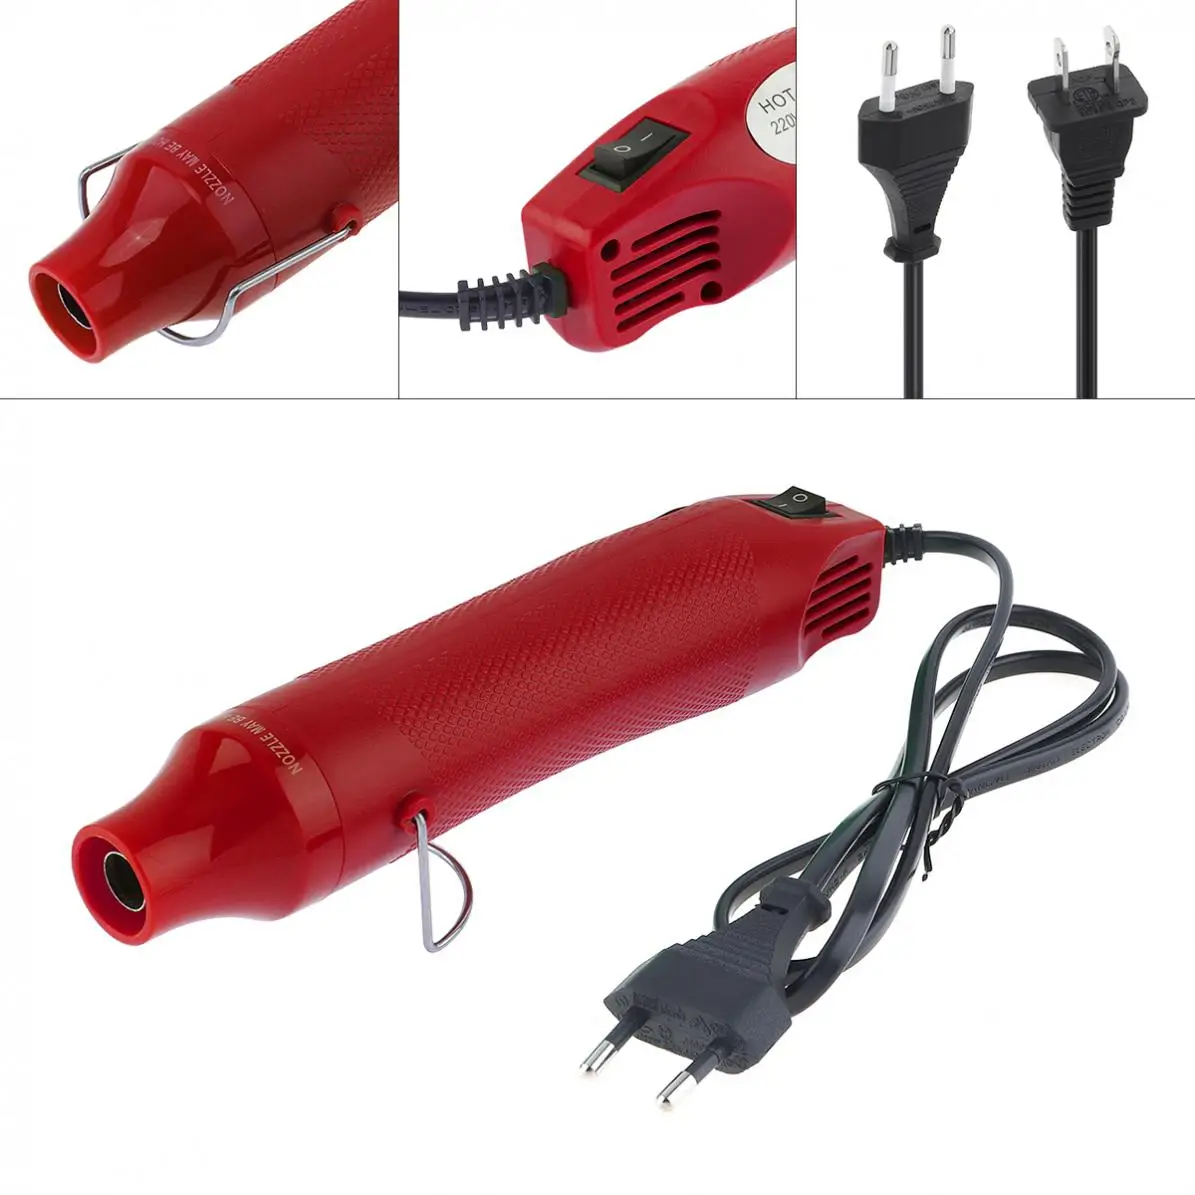 110V / 220V 300W Heat Gun Hot Air Electric Blower with Shrink Plastic Surface EU US Plug for Heating DIY Accessories 110v us plug 50w microplush washable electric heating pad foot warmer mat for feet heated electr heat pads botties winter warmer